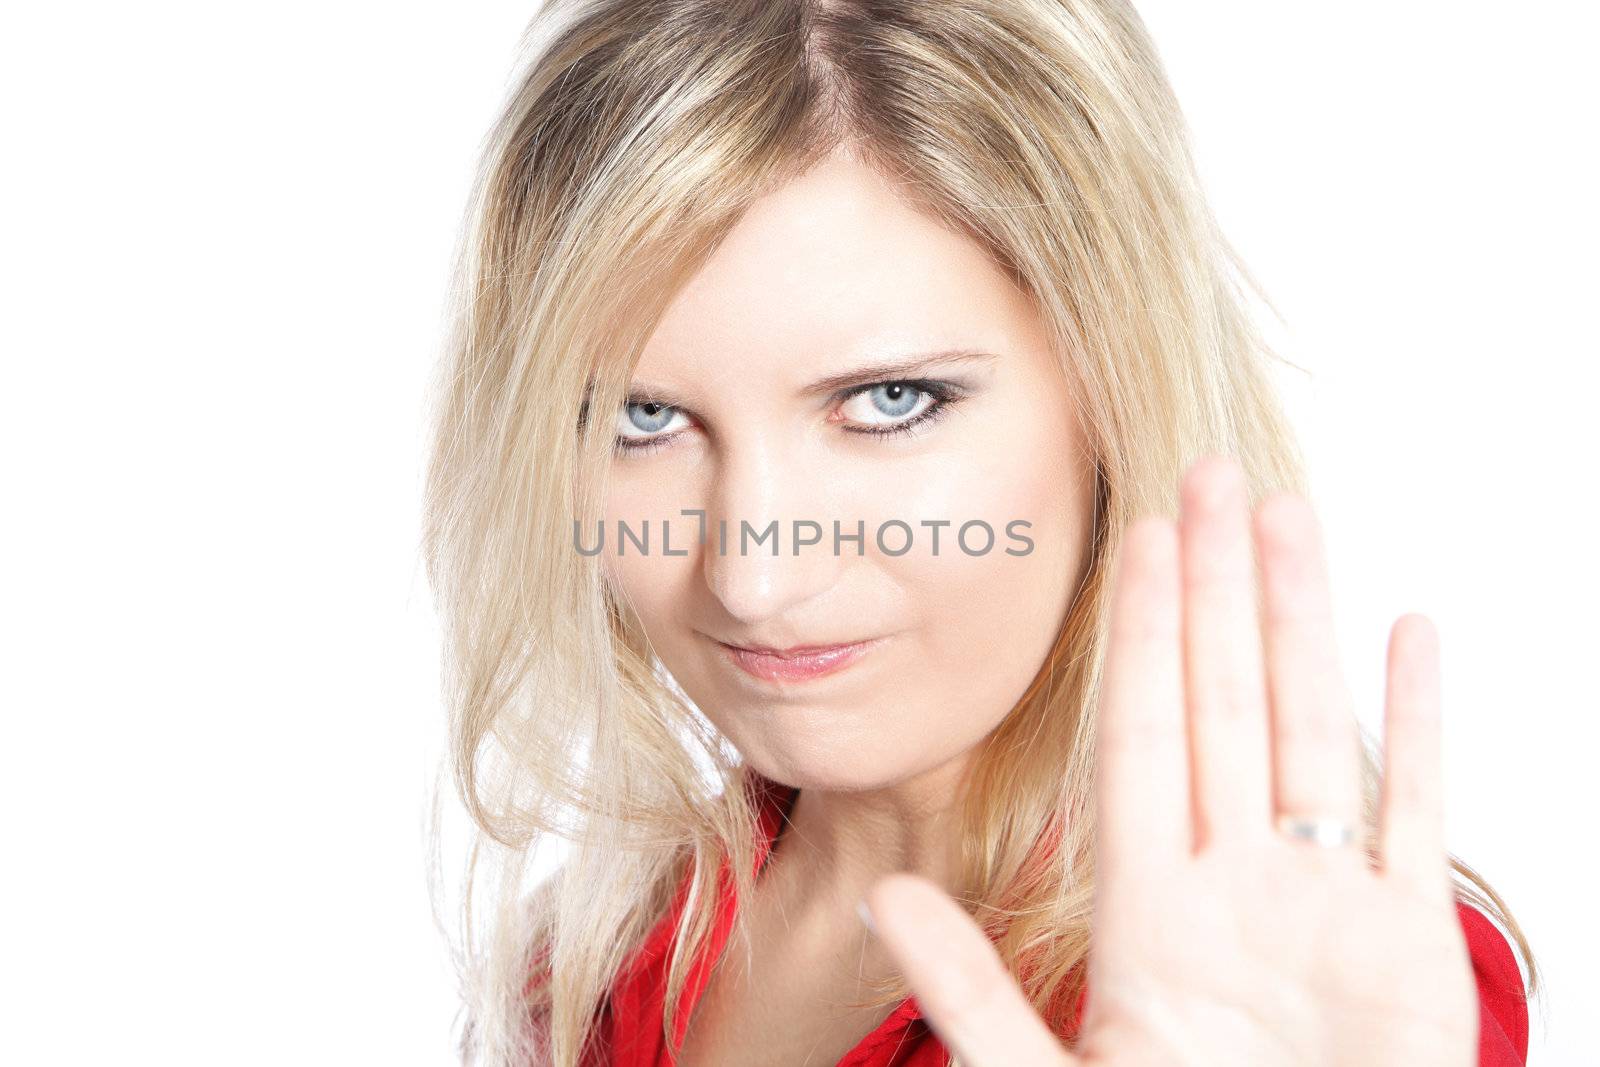 Woman making a Halt gesture raising the palm of her hand with a look of determination, head portrait on white